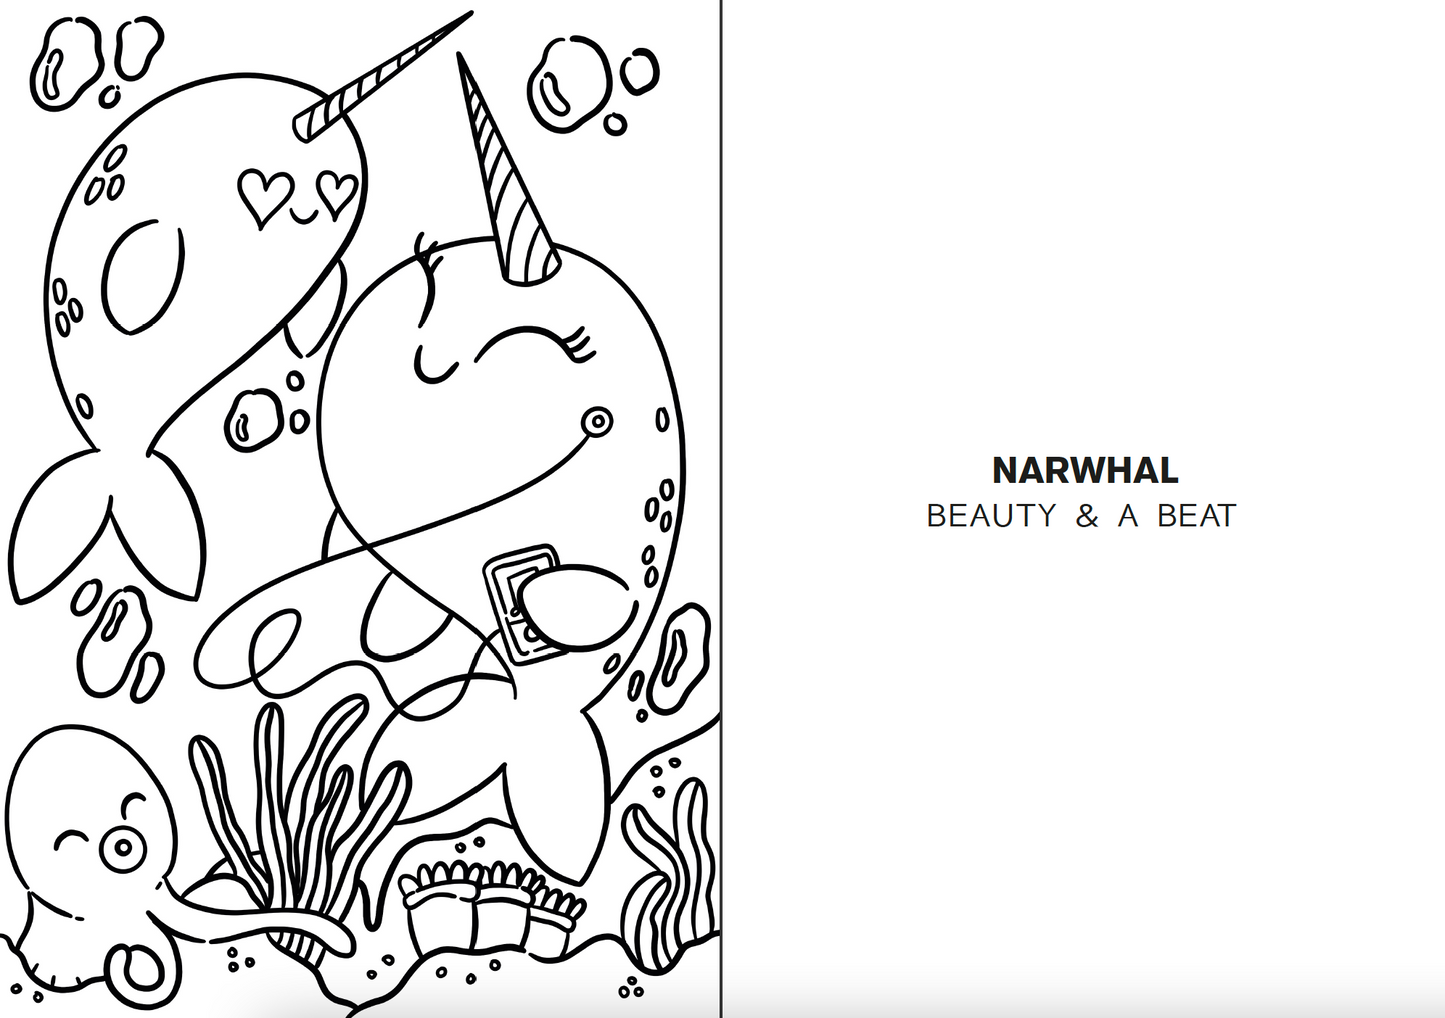 The Animals Colouring Book